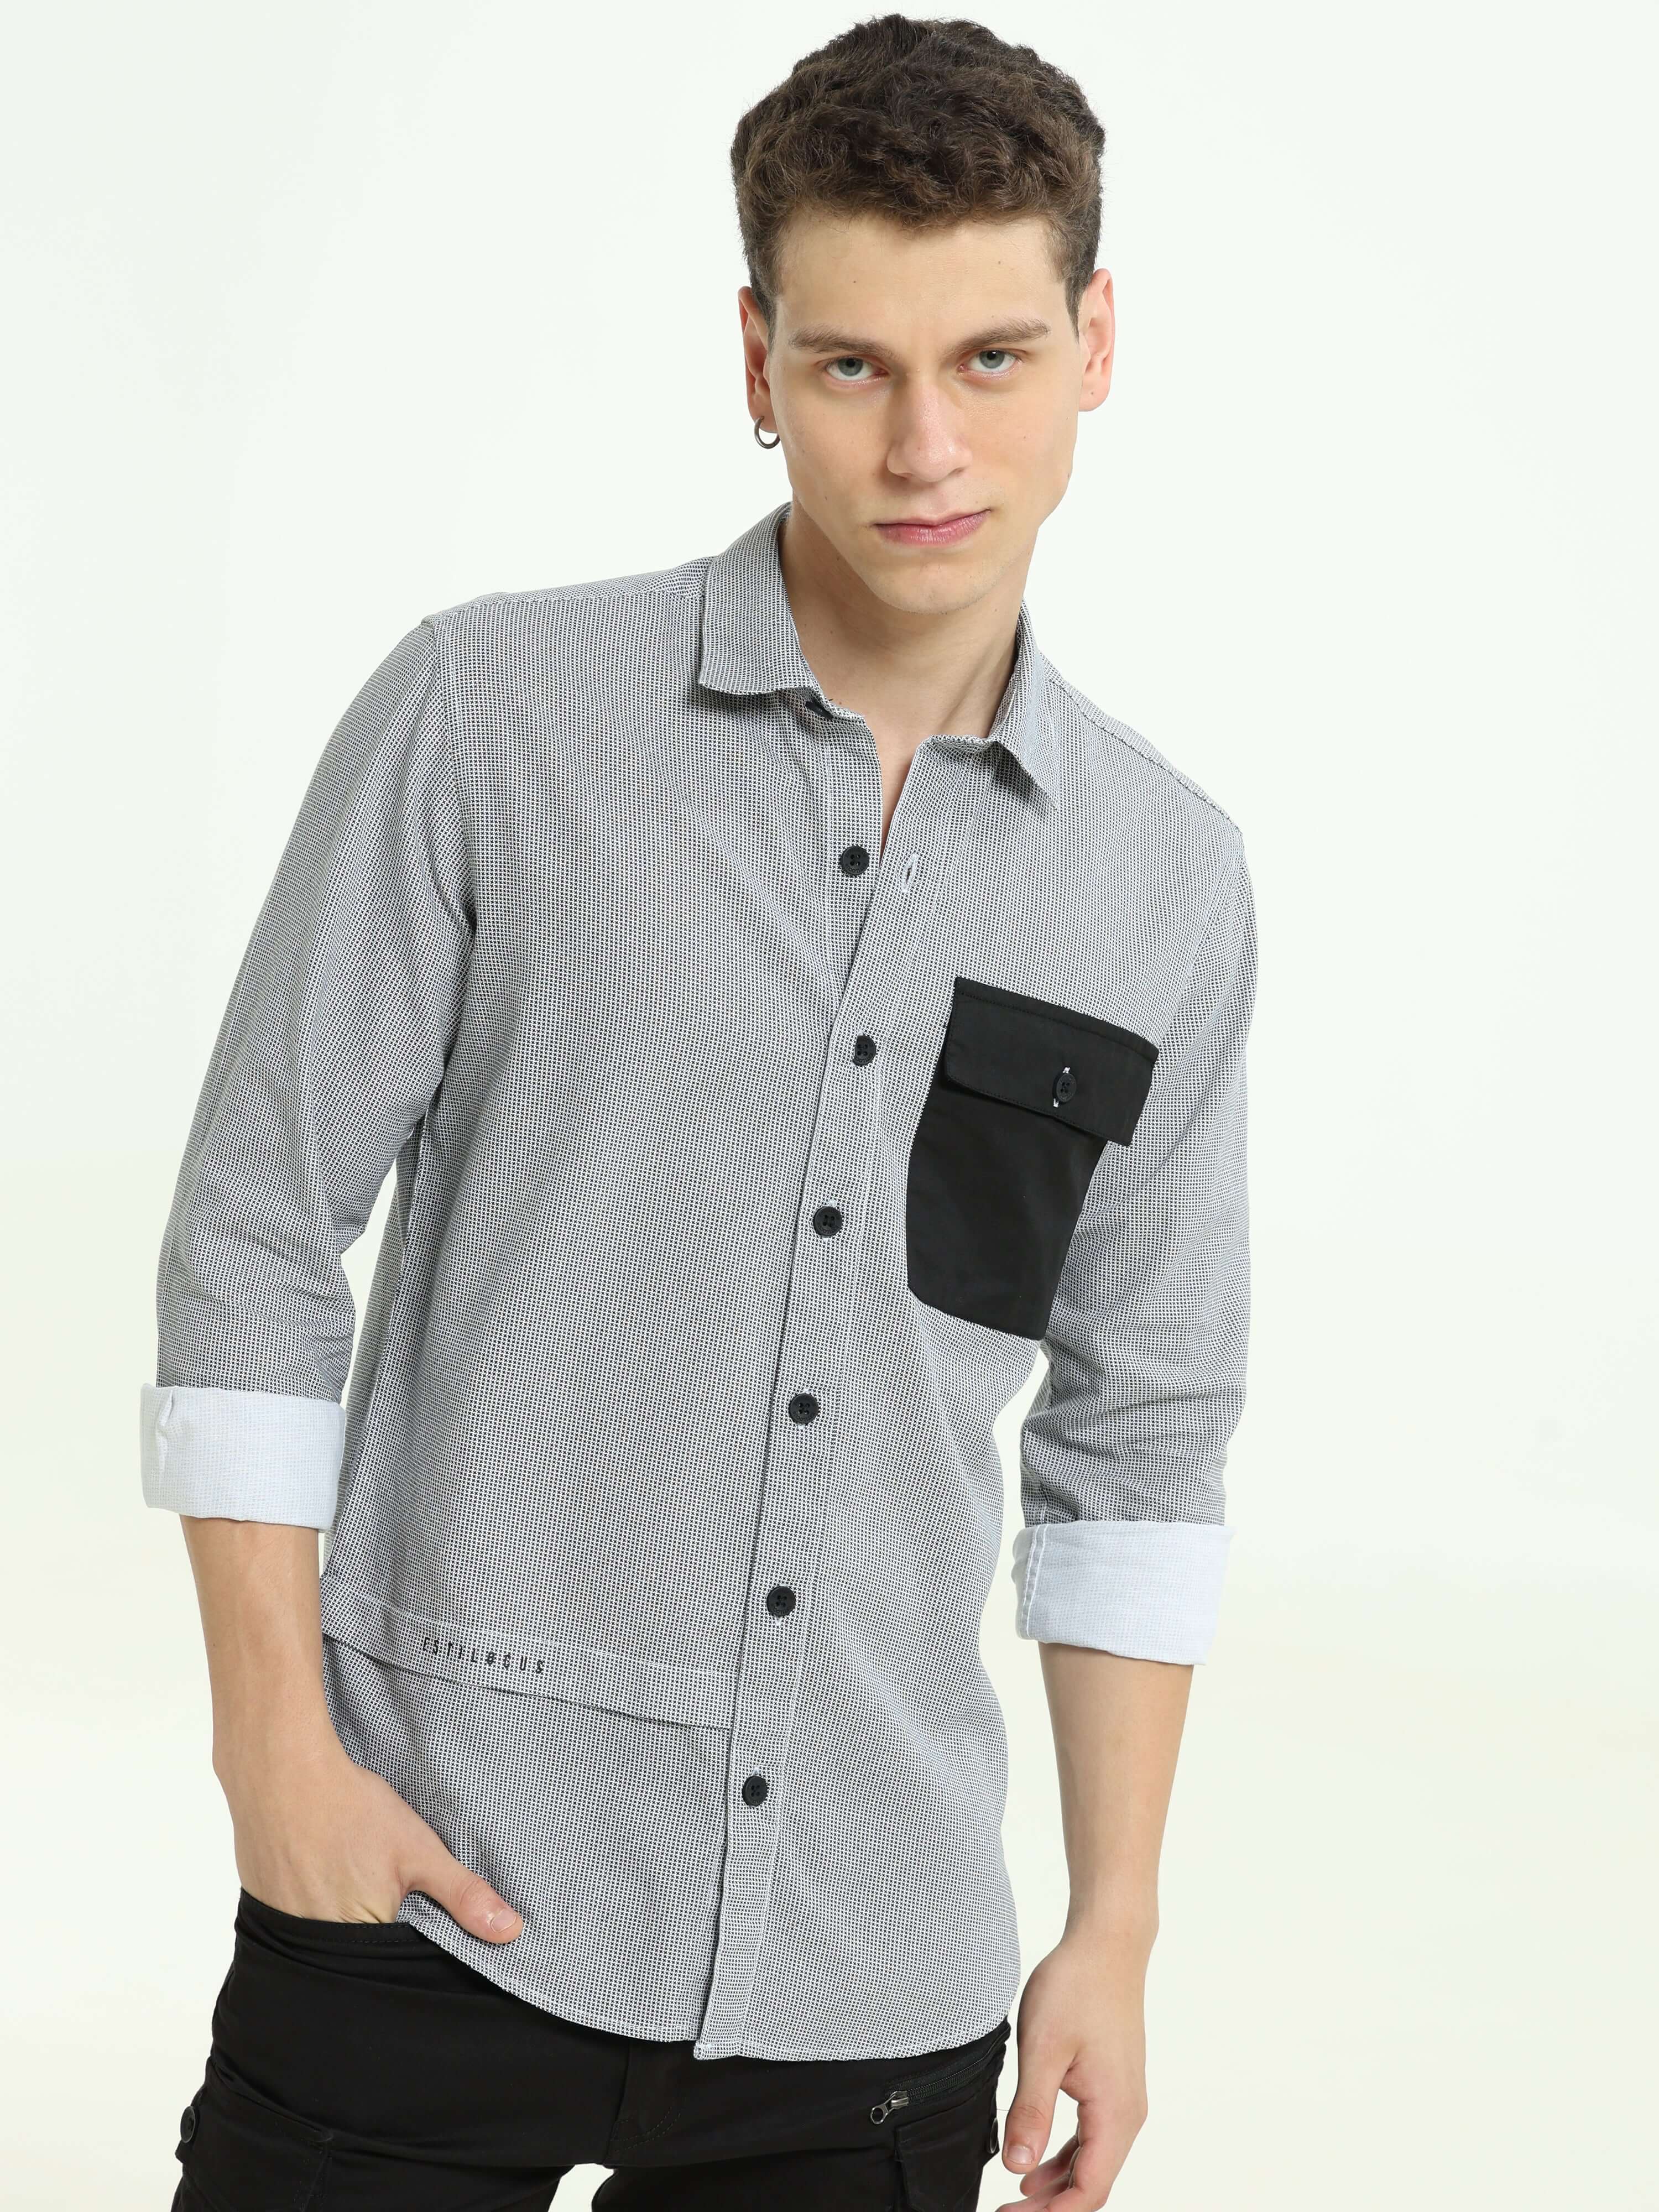 Grey contrast patch solid shirt shop online at Estilocus. • Full-sleeve solid grey shirt• Cut and sew placket• Regular collar• Double button square cuff.• Single pocket with logo embroidery• Curved hemline• All double-needle construction, finest quality s